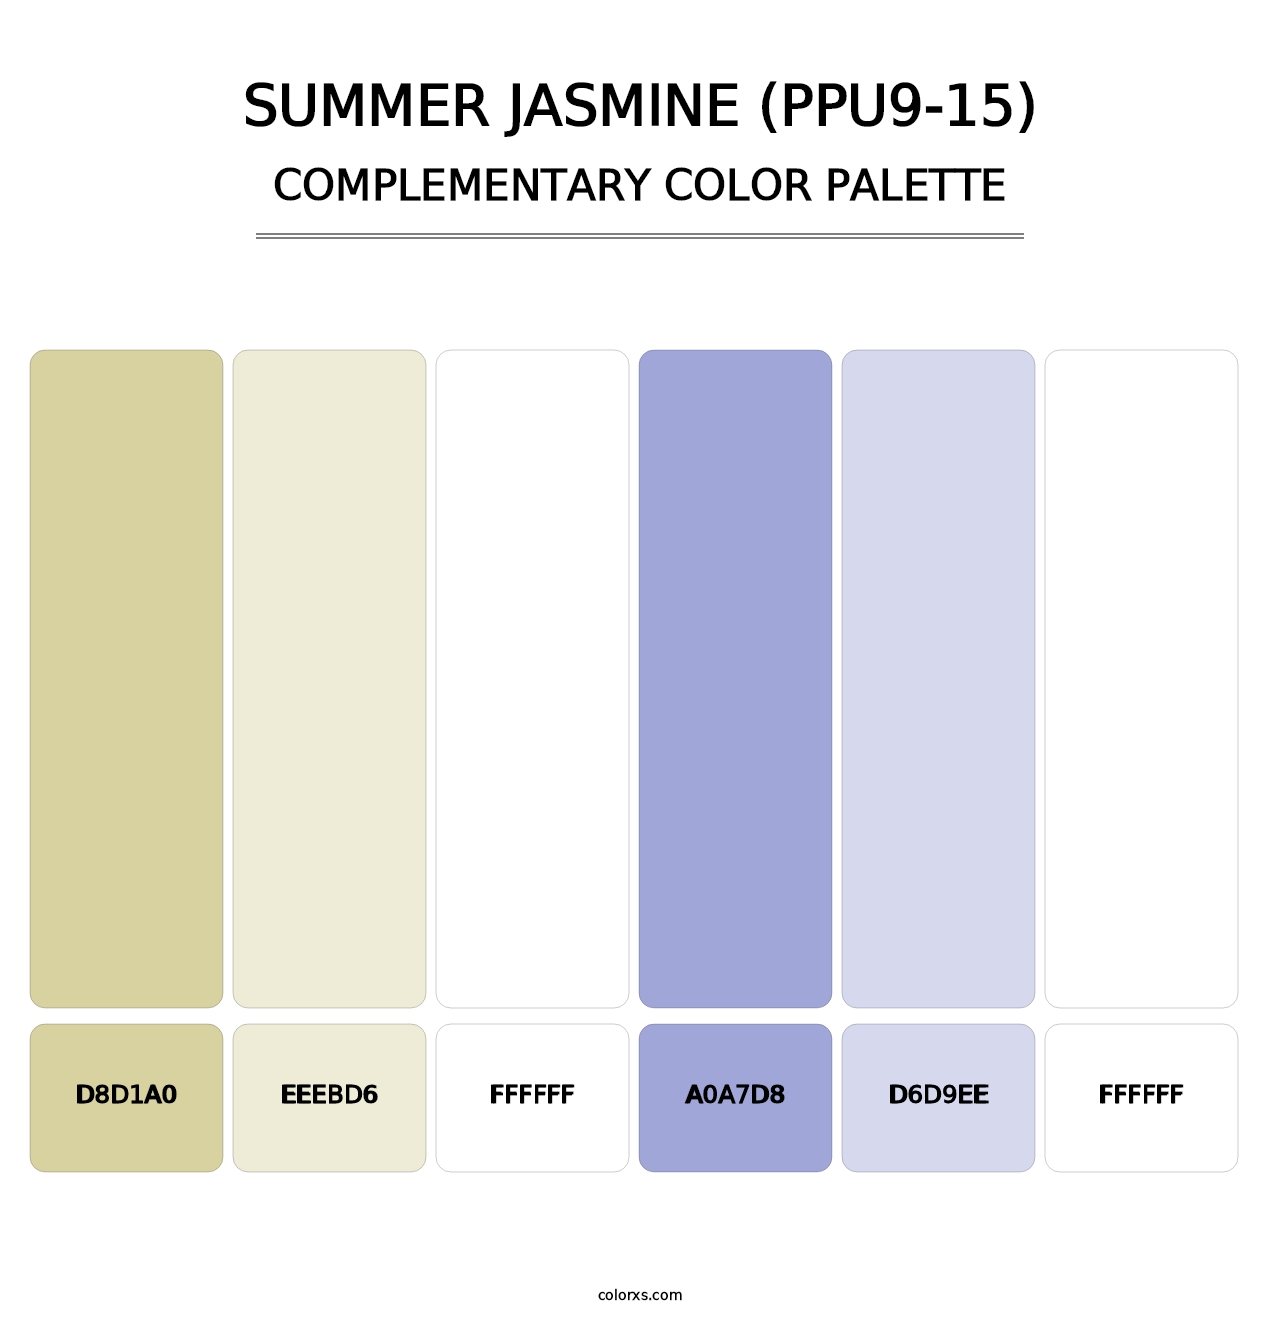 Summer Jasmine (PPU9-15) - Complementary Color Palette